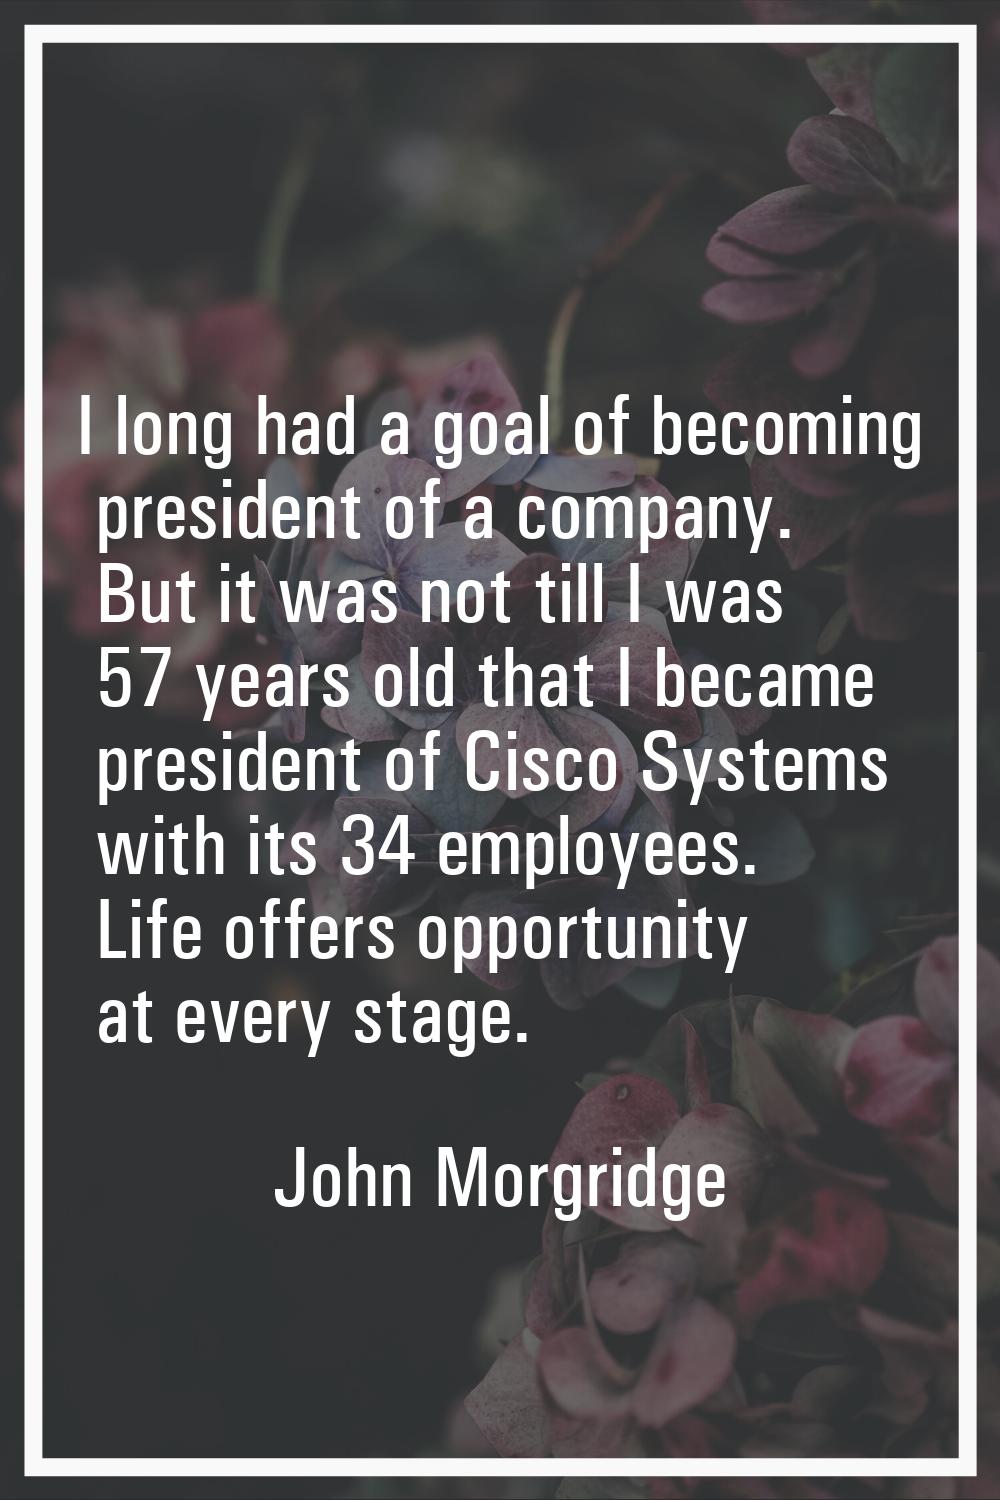 I long had a goal of becoming president of a company. But it was not till I was 57 years old that I